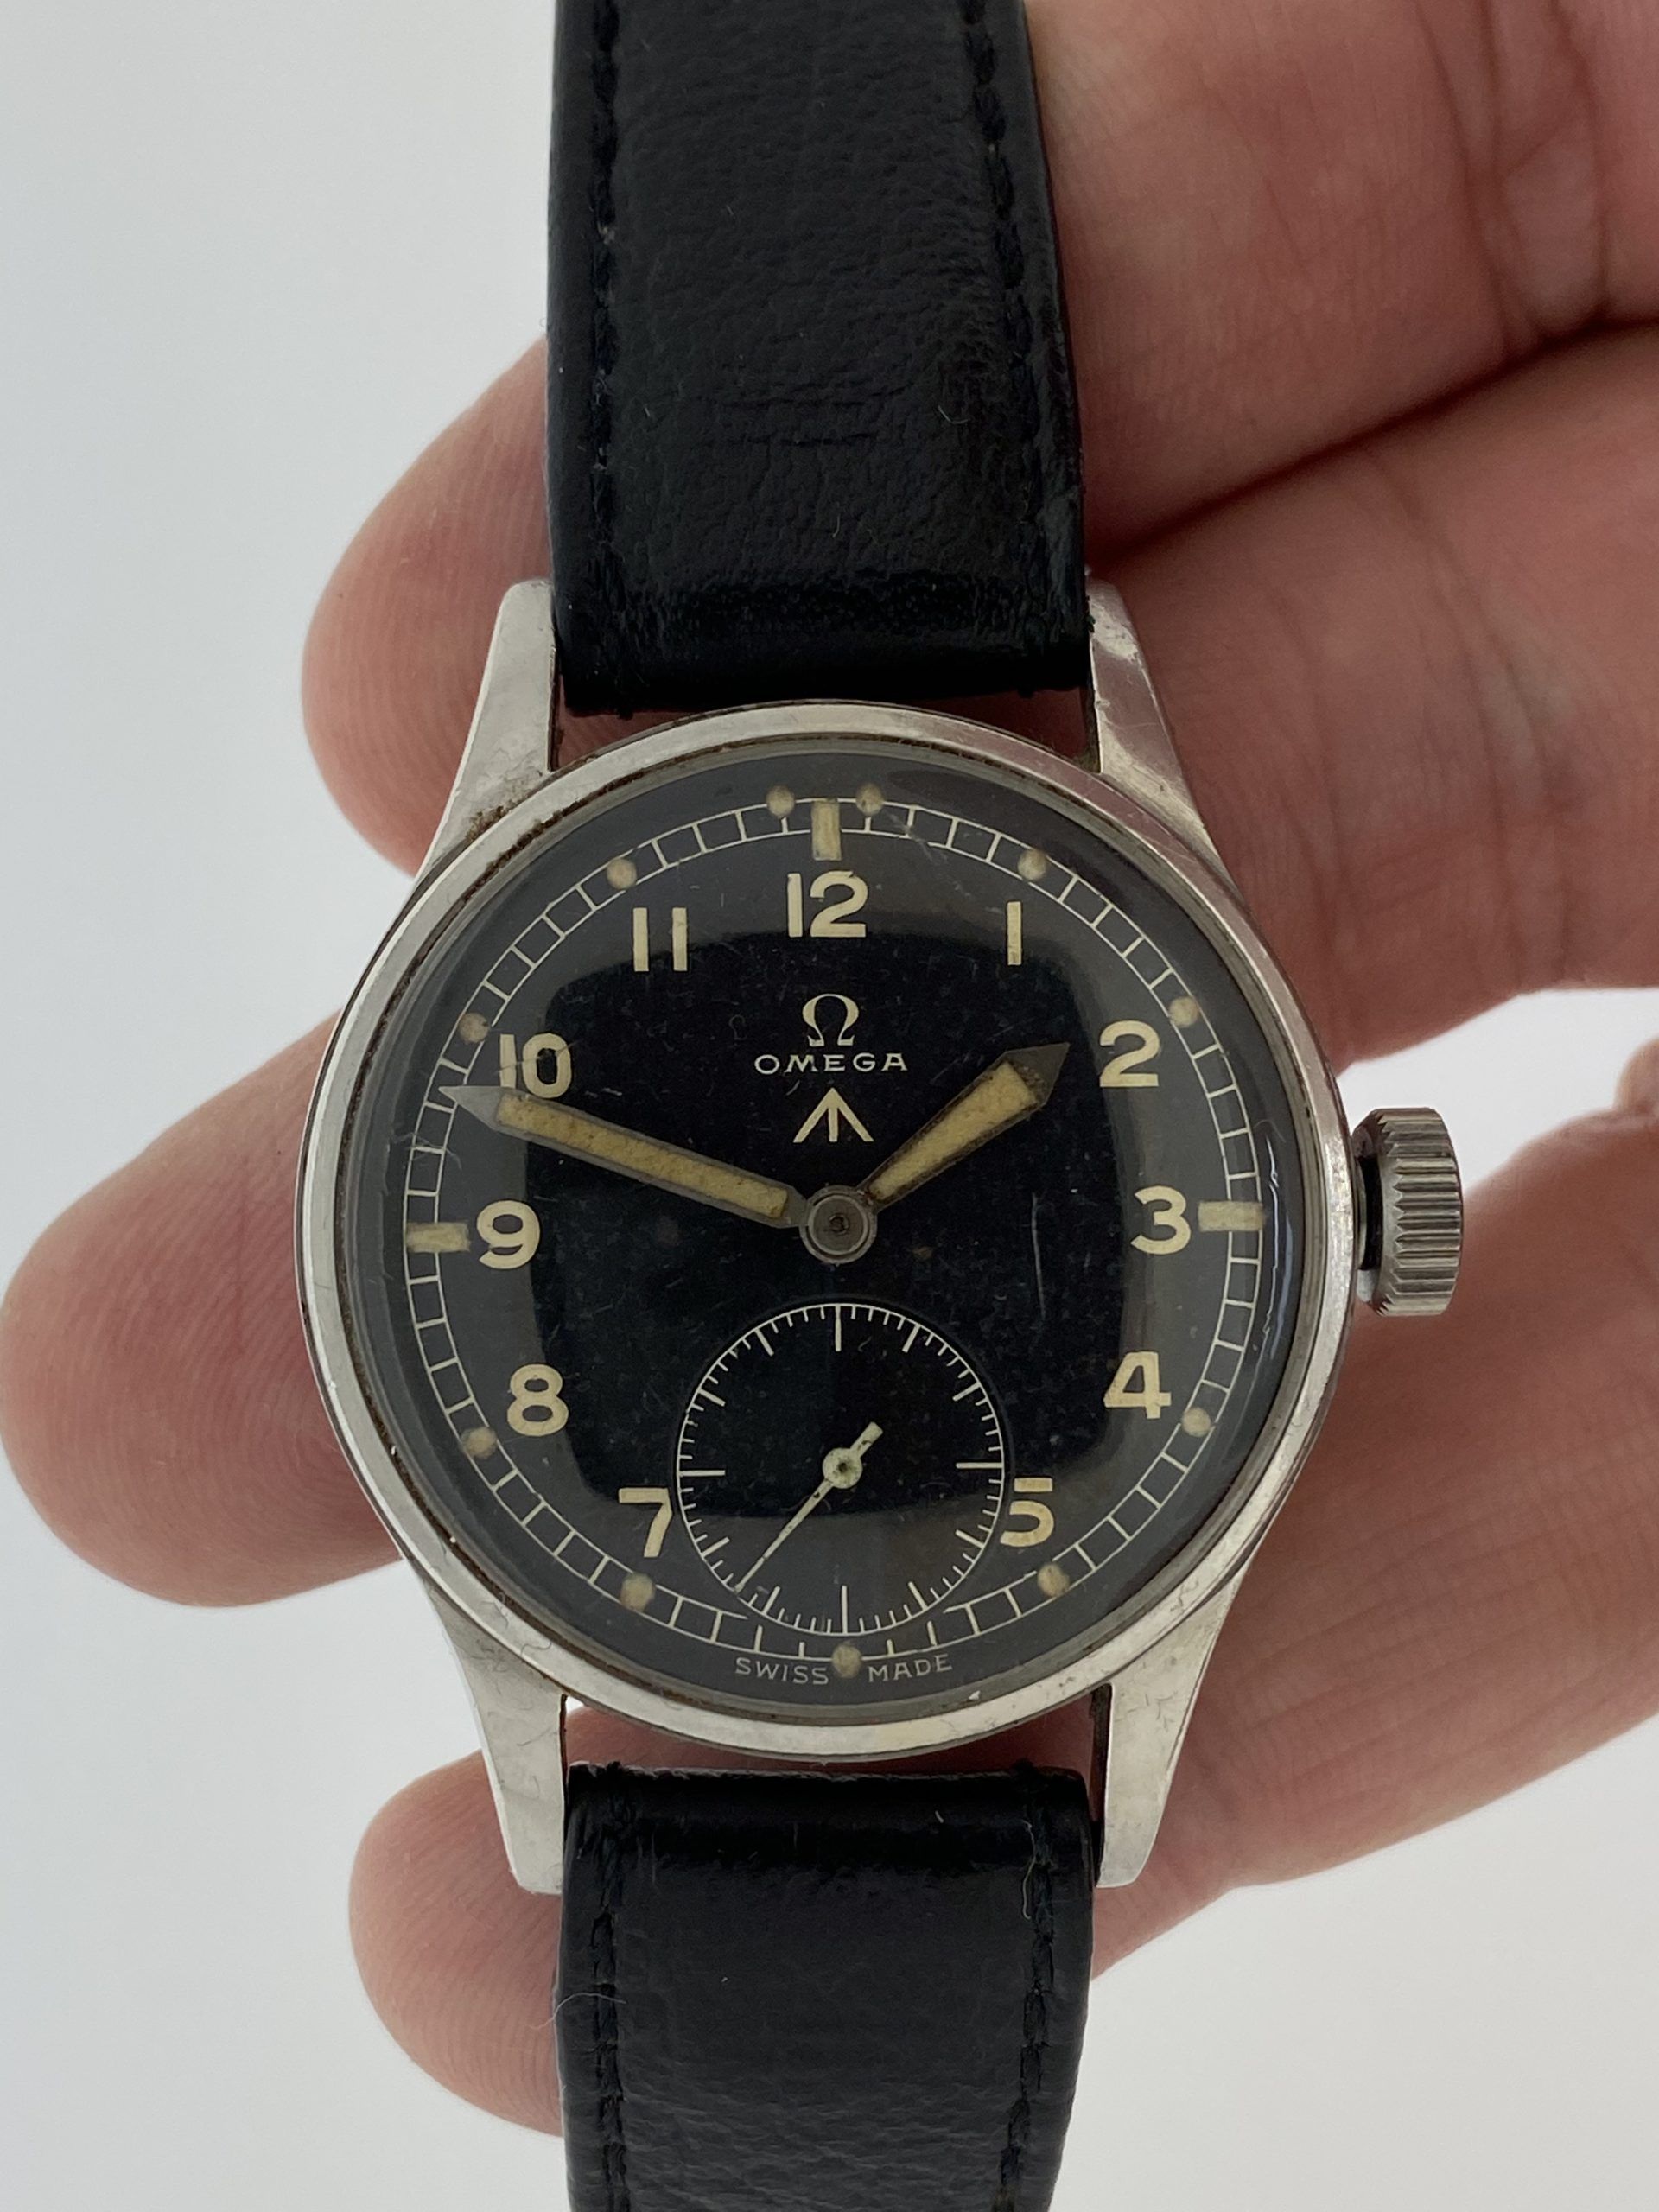 omega 1944 military watch